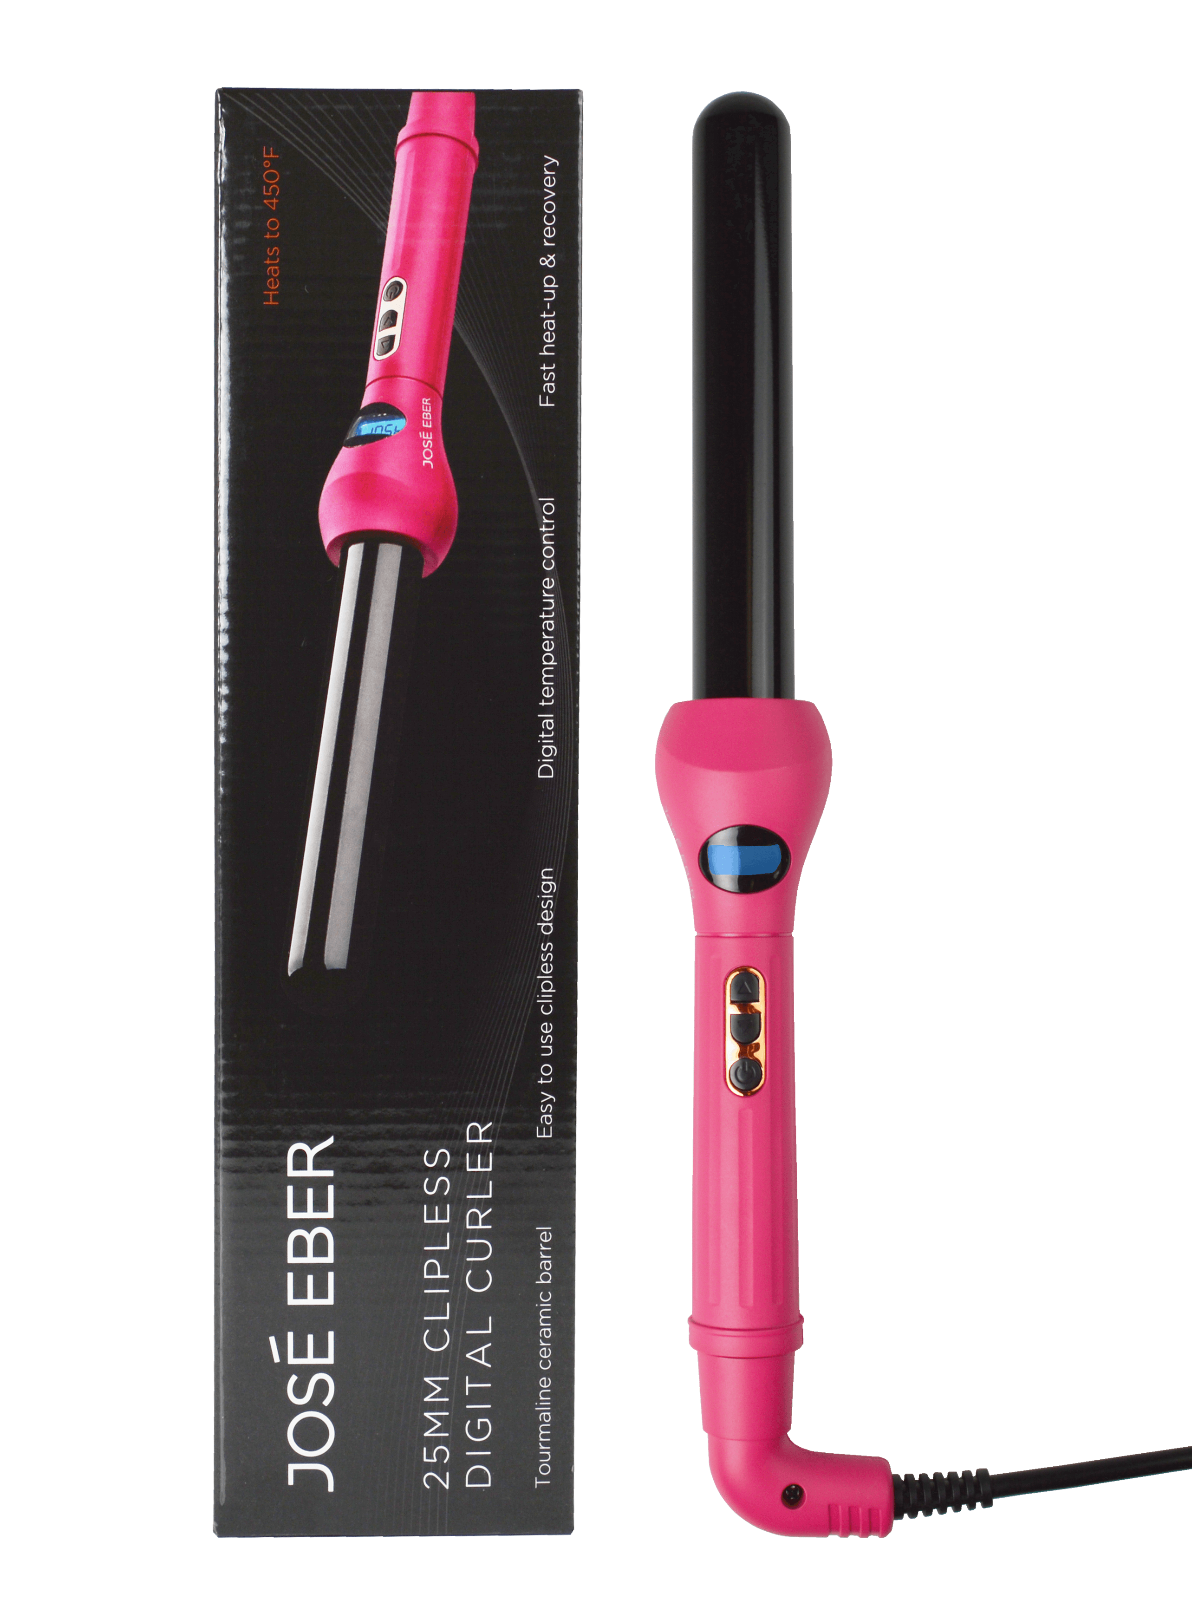 Jose Eber 25mm, Digital Clipless Curling Iron, Curler, Wand, Pink, Dual Voltage